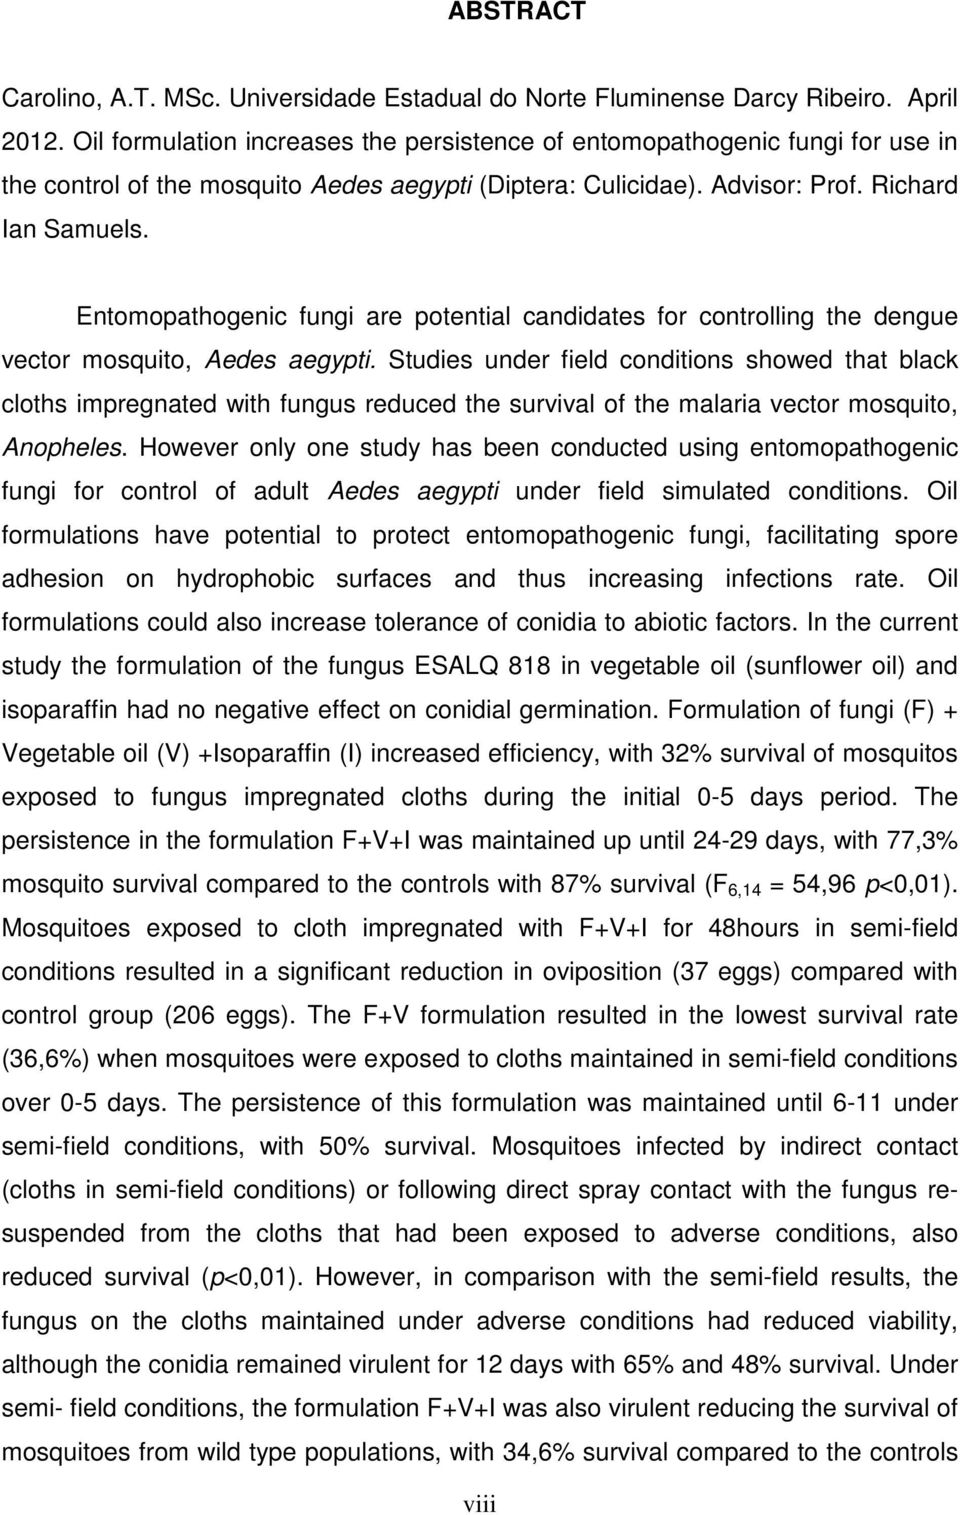 Entomopathogenic fungi are potential candidates for controlling the dengue vector mosquito, Aedes aegypti.